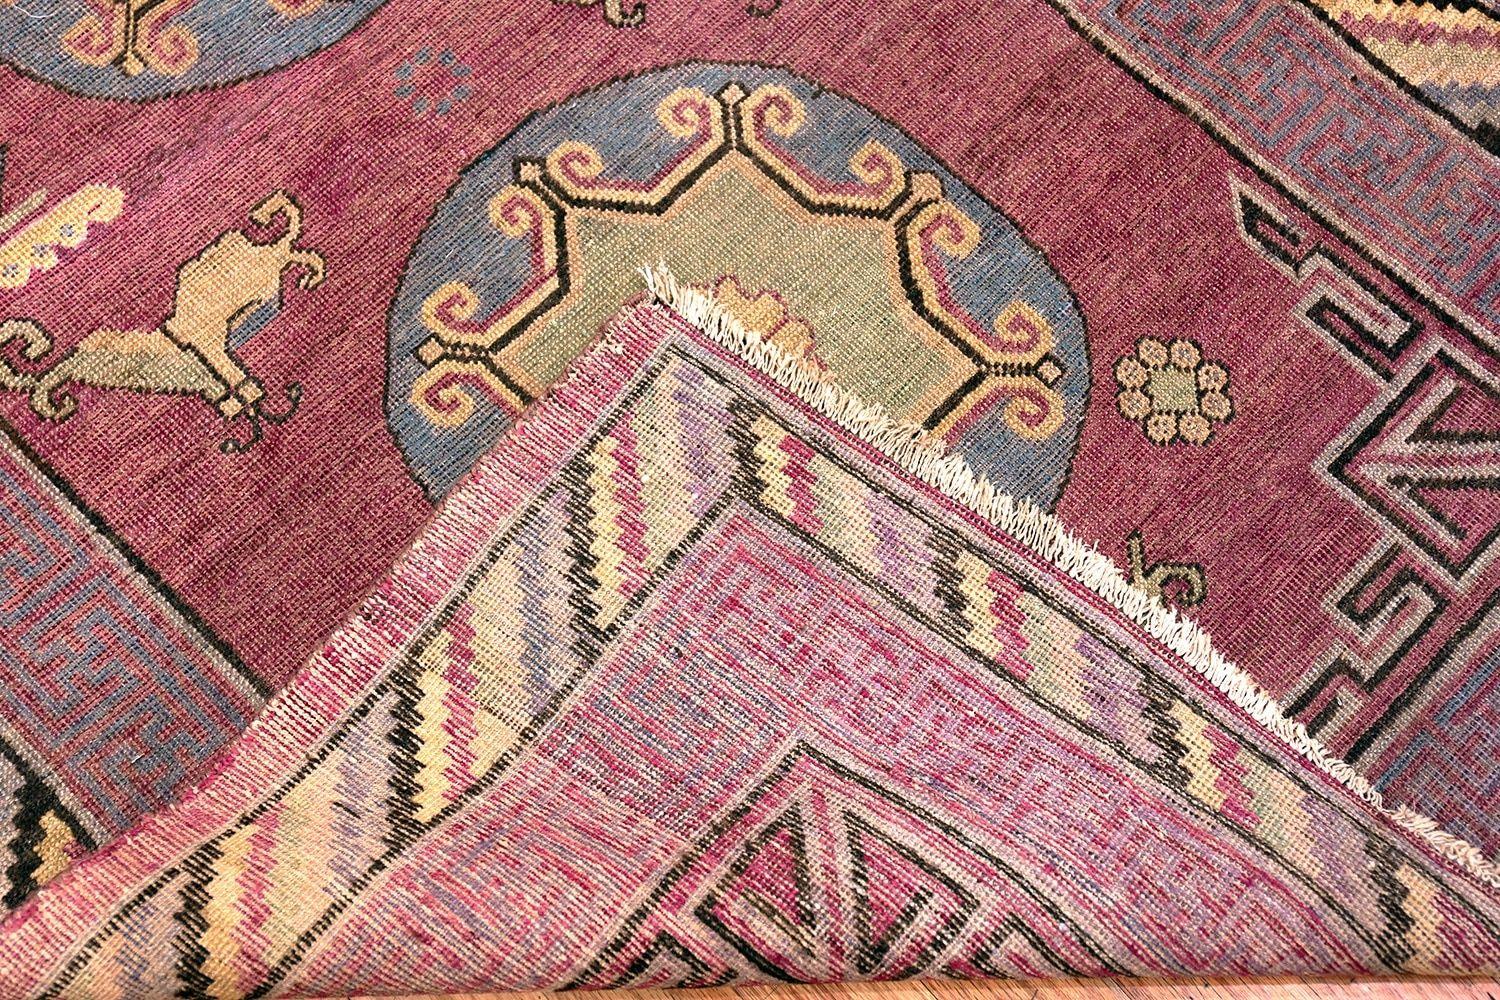 An extremely artistic small size Tribal purple antique Khotan rug, country of origin / Rug type: Antique East Turkestan rugs, circa date: 1900. Size: 4 ft x 8 ft (1.22 m x 2.44 m)

For centuries, antique Khotan rugs have stood out for their unique